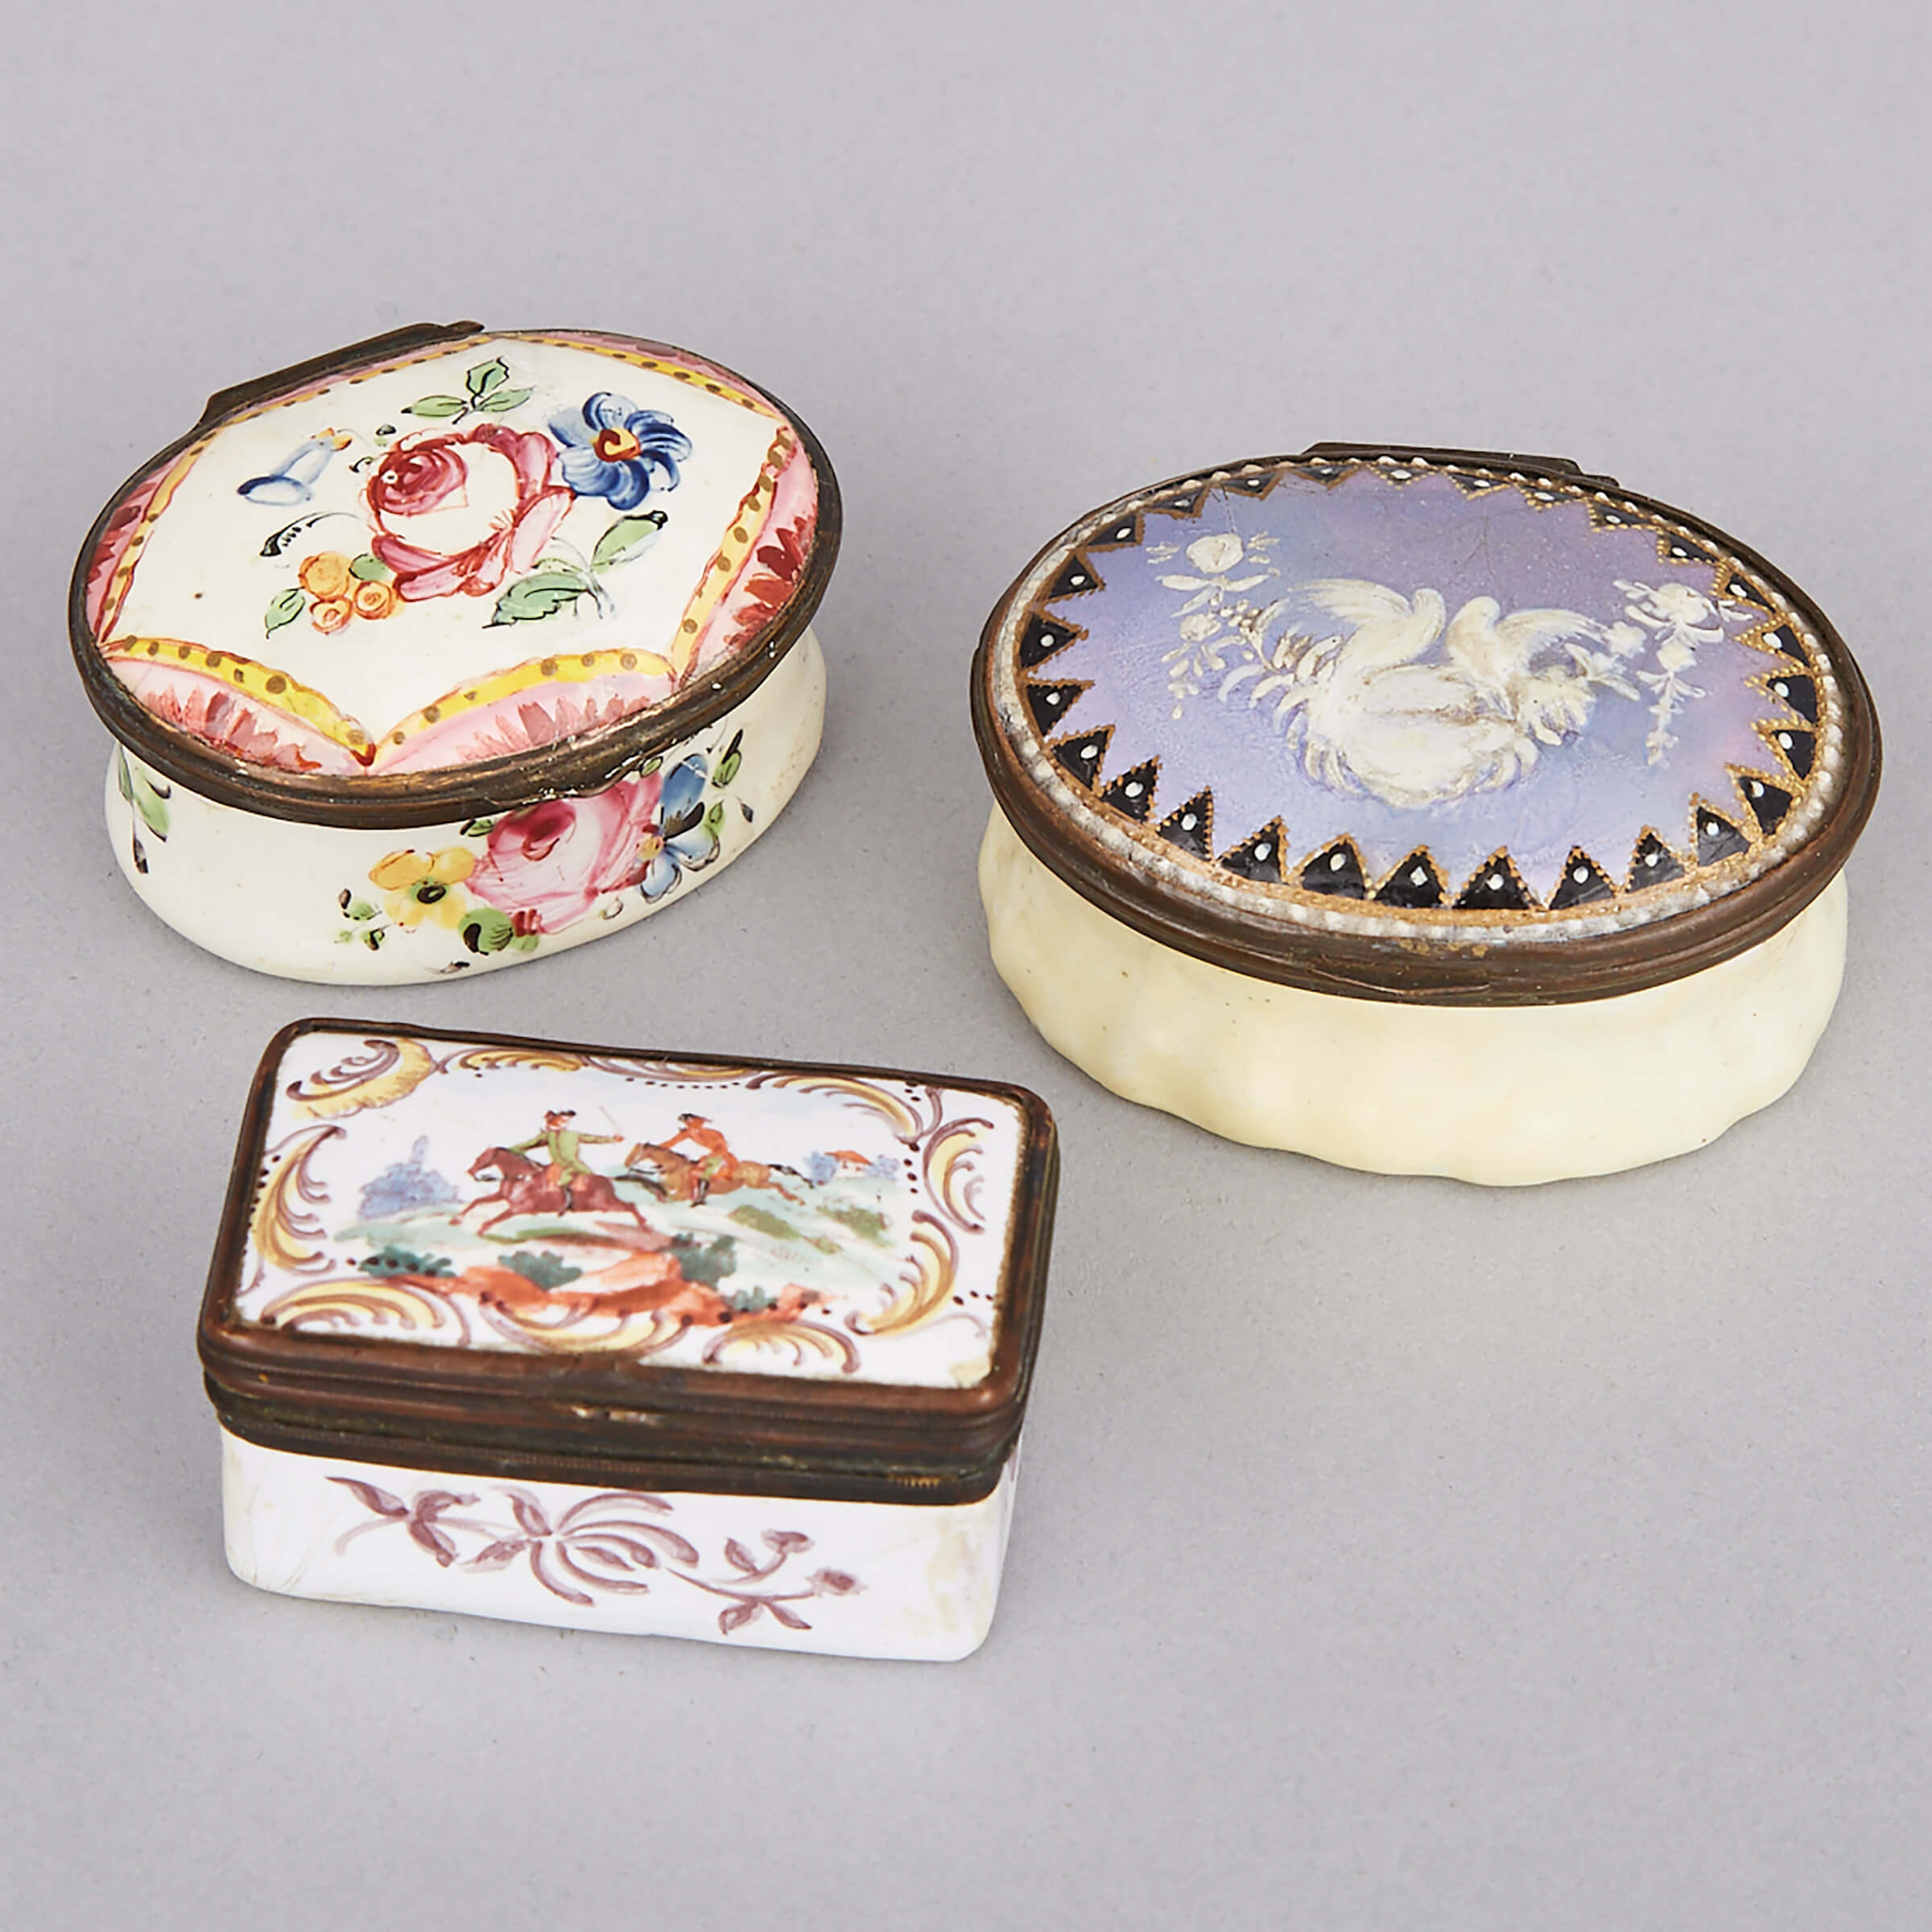 Two Battersea Enamel Snuff Boxes and a Patch Box, 18th/19th century